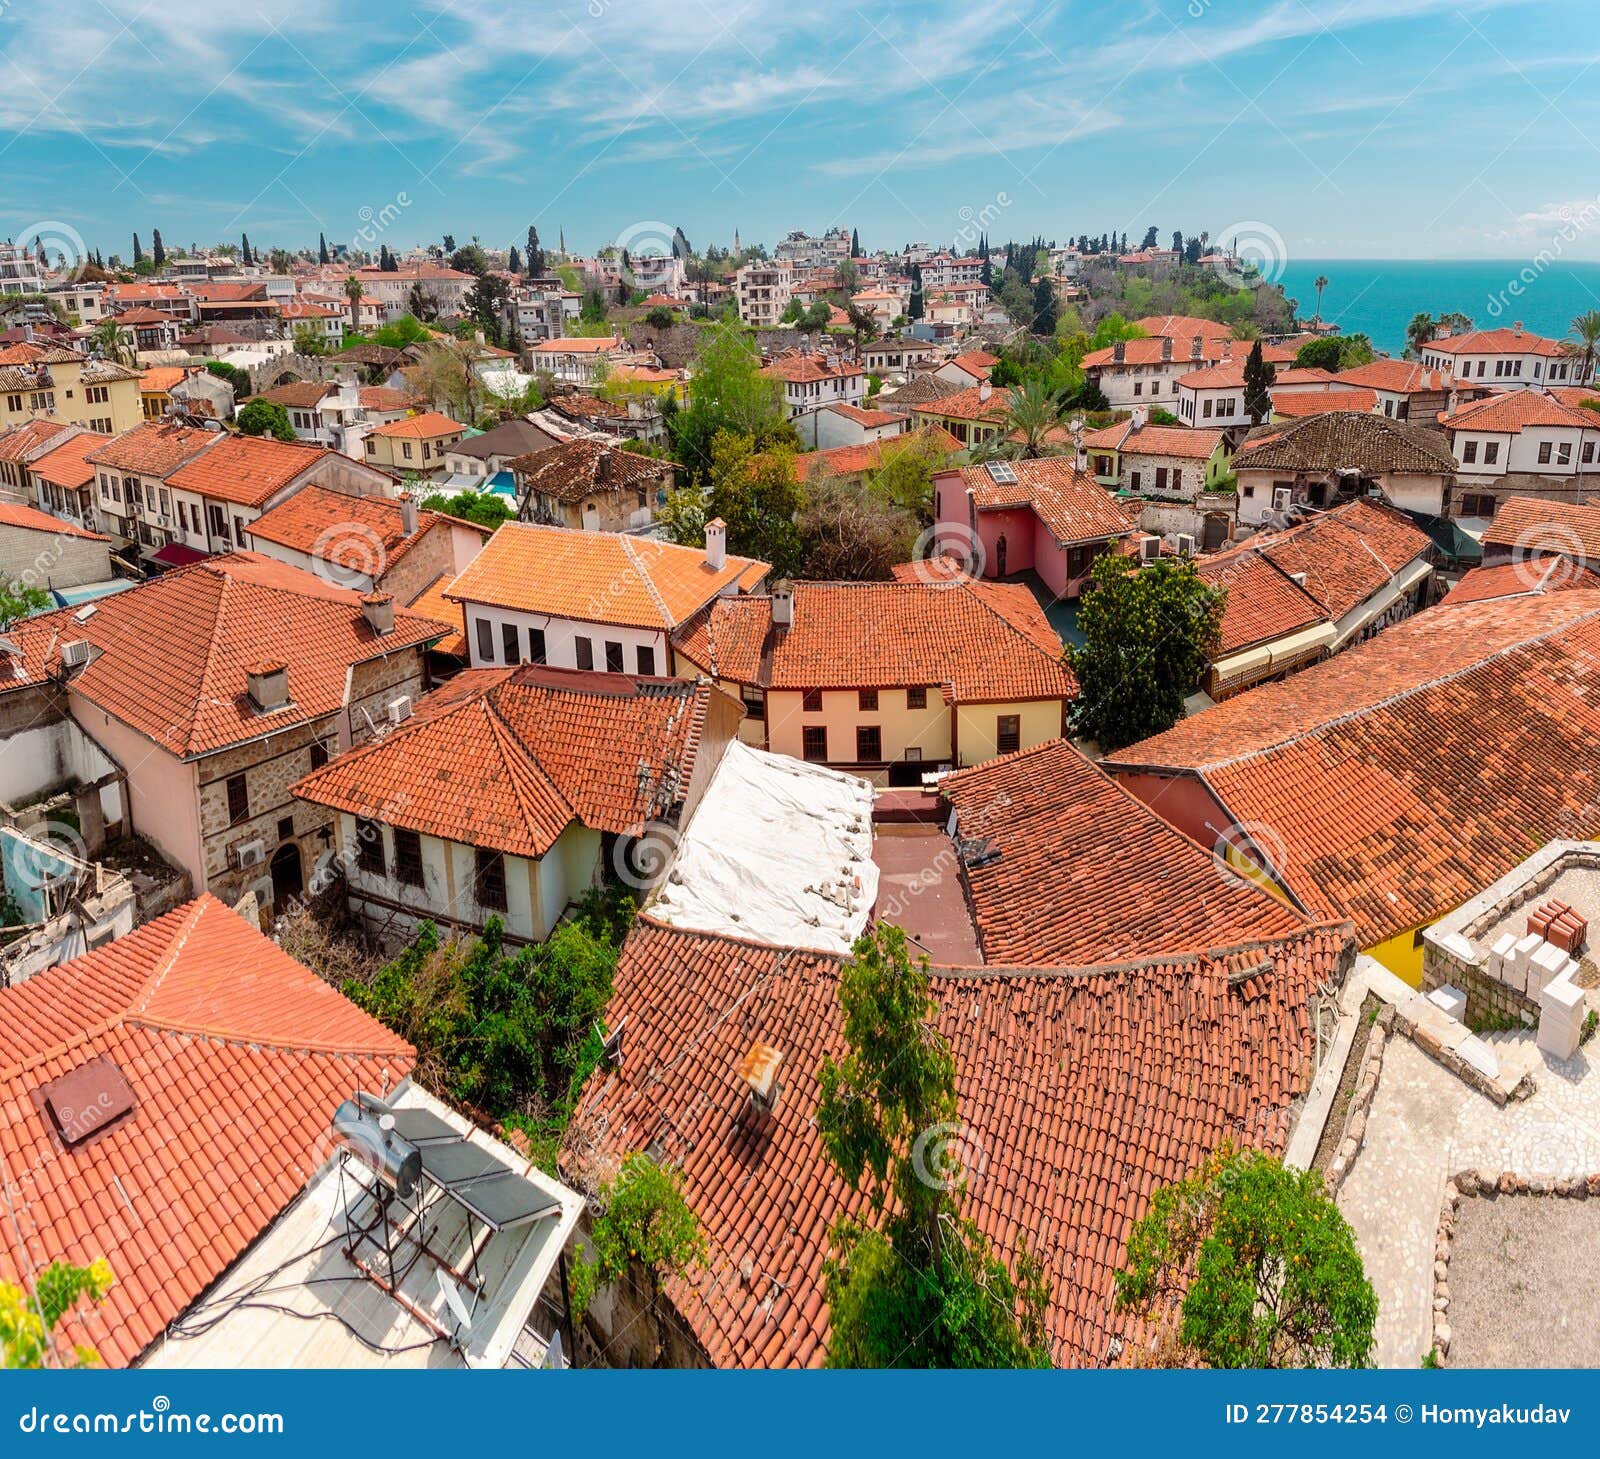 aerial view of the buildings in the kaleichi district in the turkish city of antalya.